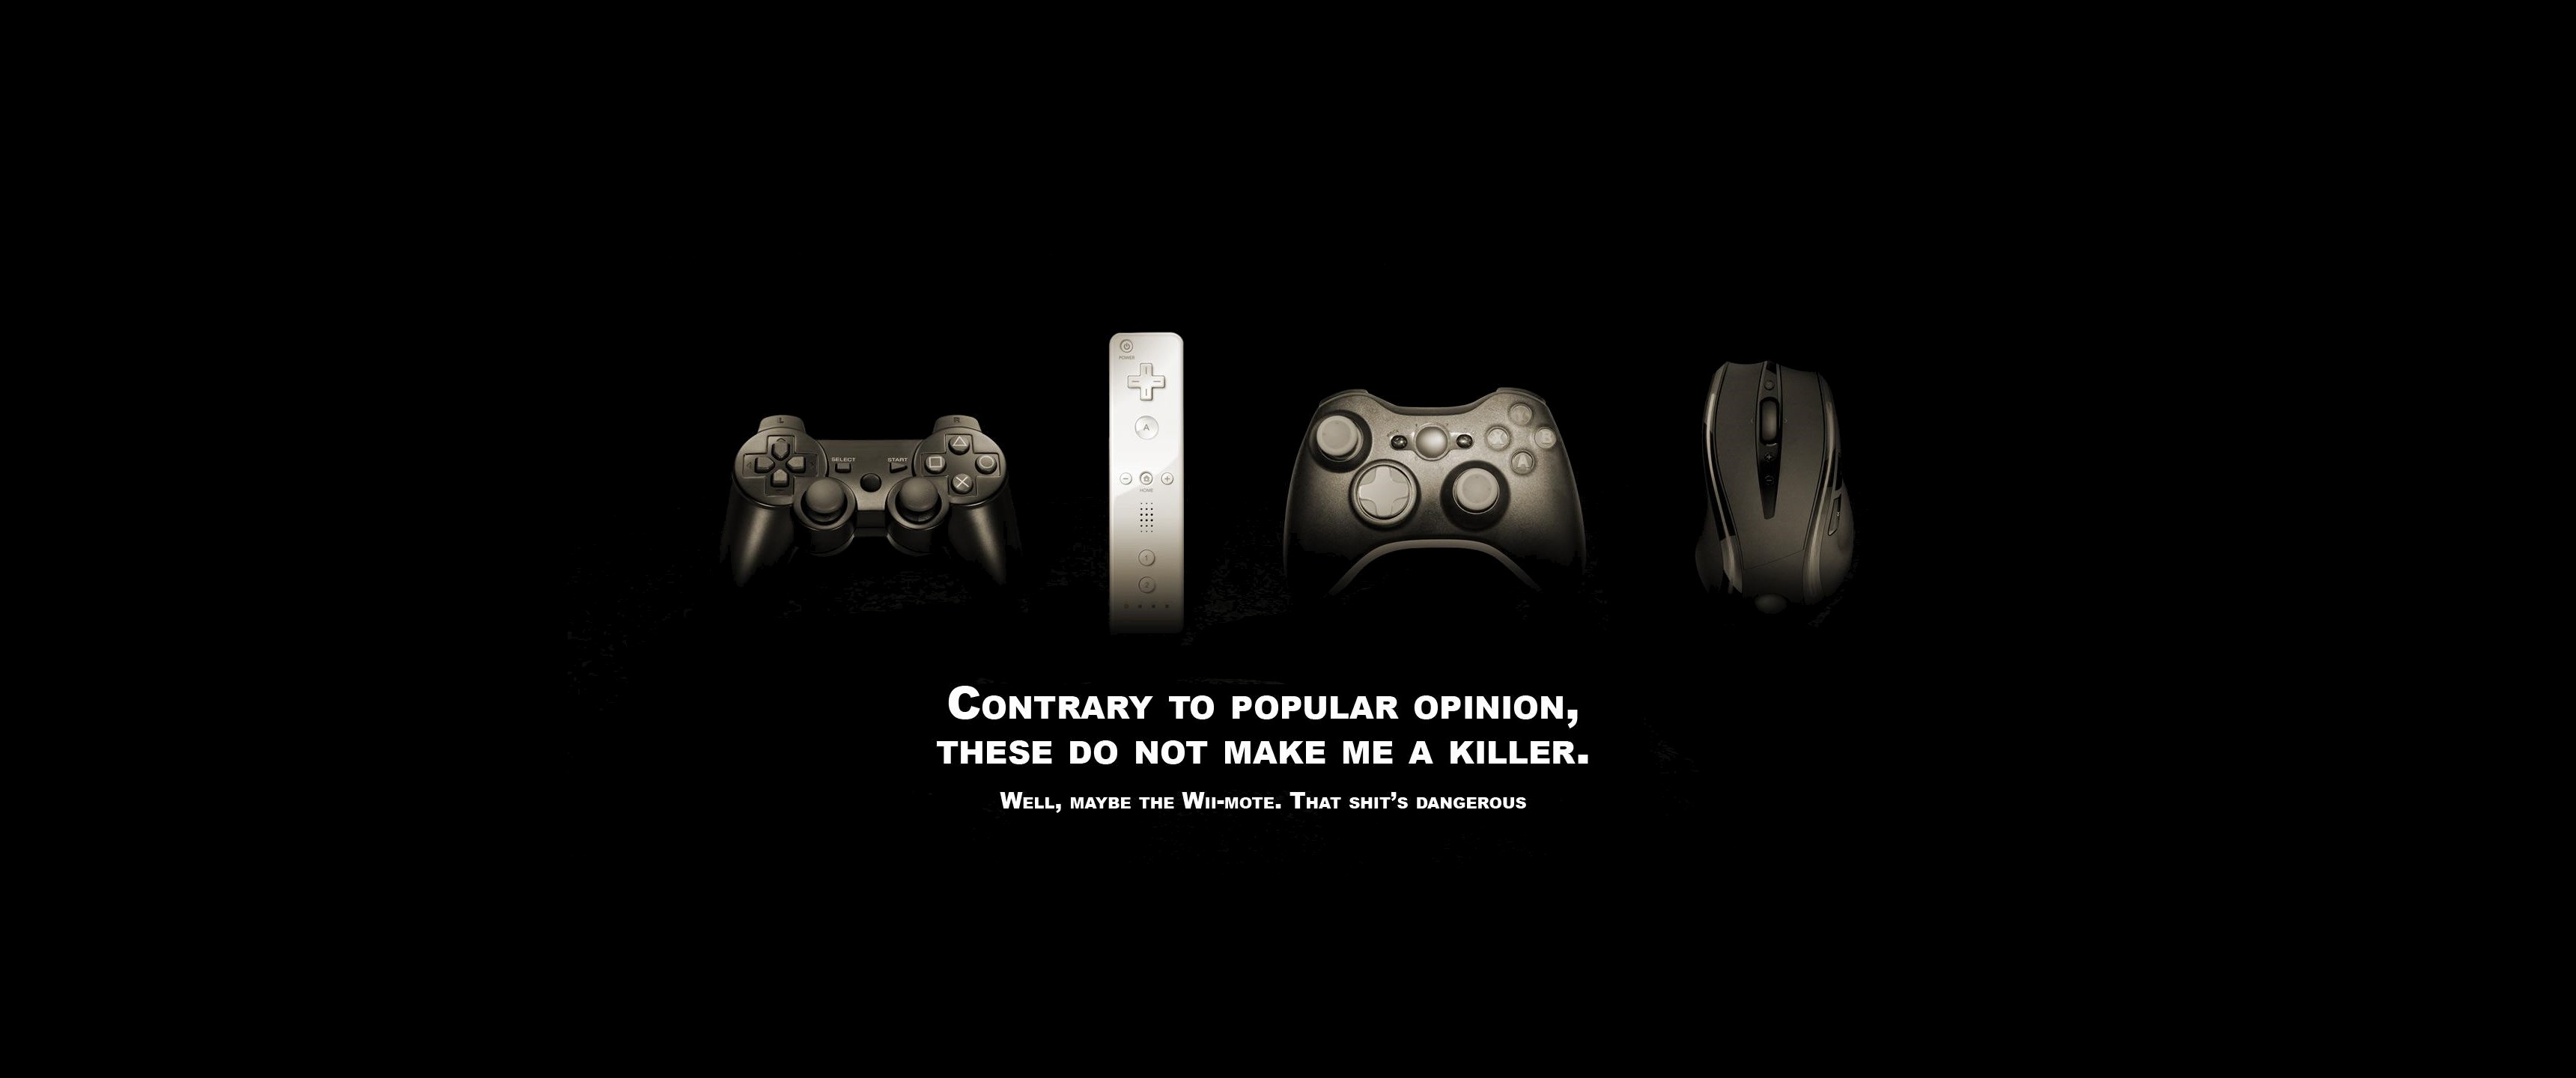 General 3440x1440 video games controllers quote typography black background X-Box Wii PlayStation humor computer mice simple background